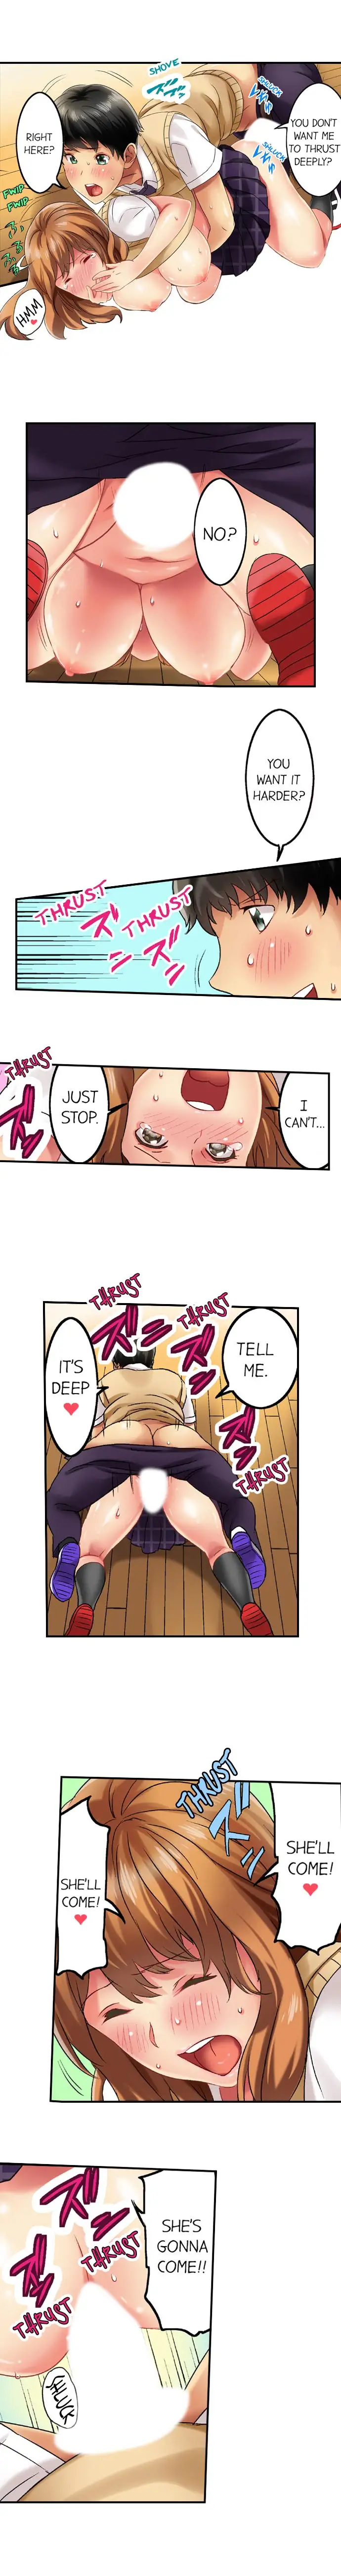 Seeing Her Panties Lets Me Stick In - Chapter 3 Page 4